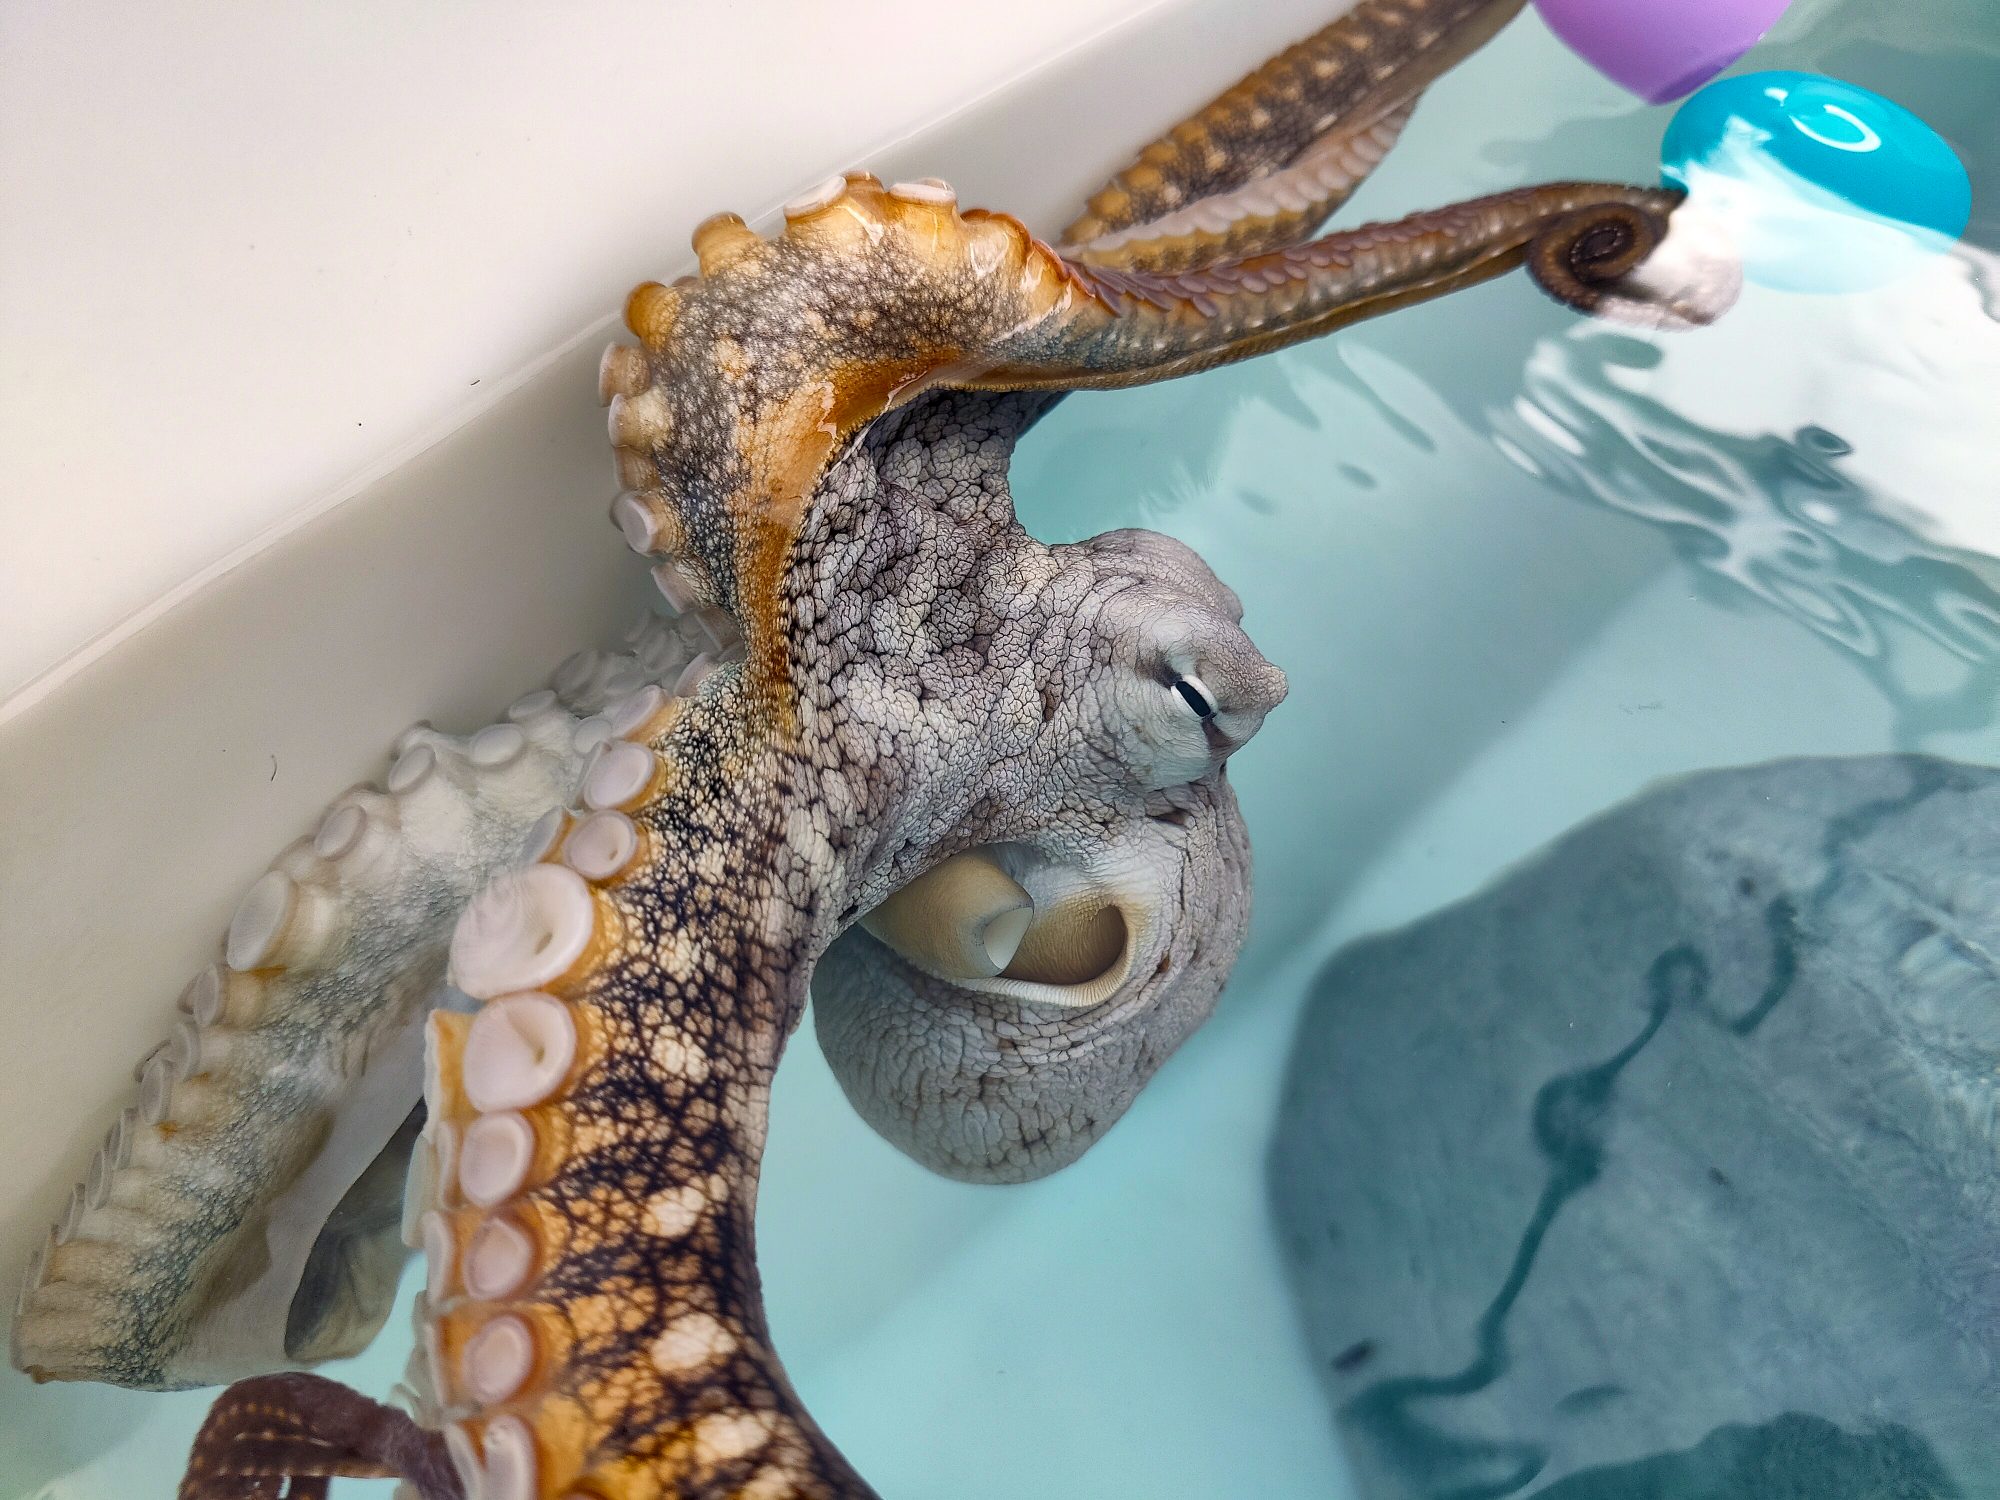 Investigation: The Murky Truth Behind Hawaii's Octopus Farm - The